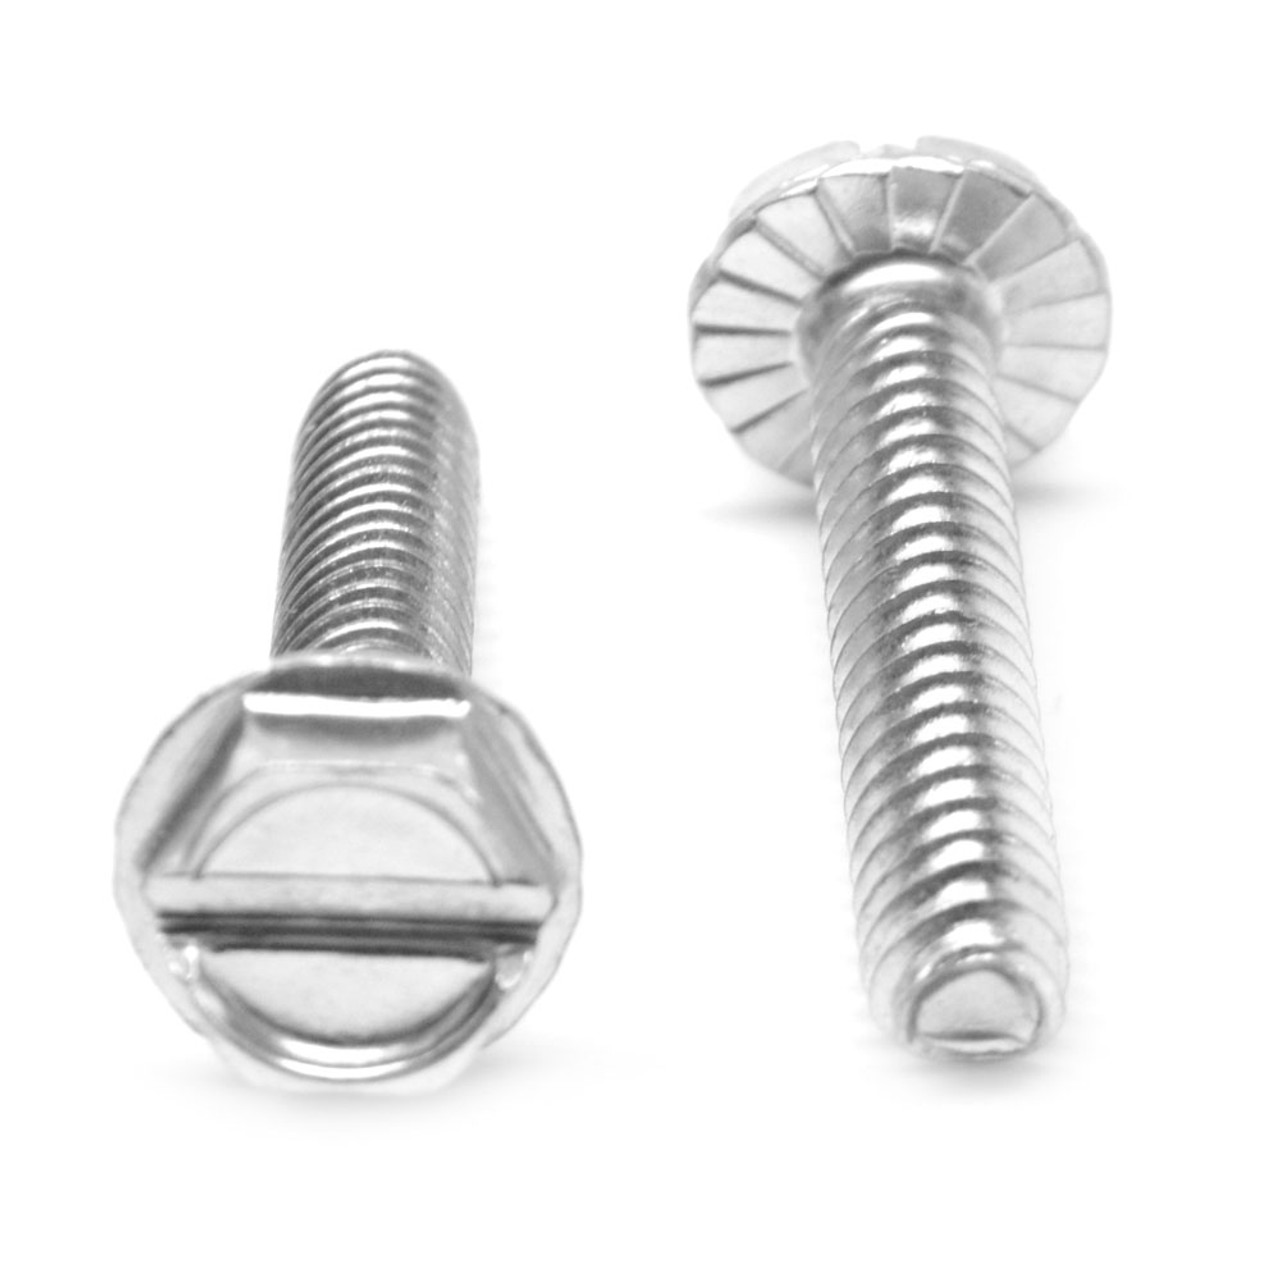 #10-24 x 1/2" (FT) Coarse Thread Taptite?-Alternative Thread Rolling Screw Slotted Hex Washer Head with Serration Low Carbon Steel Zinc Plated / Wax